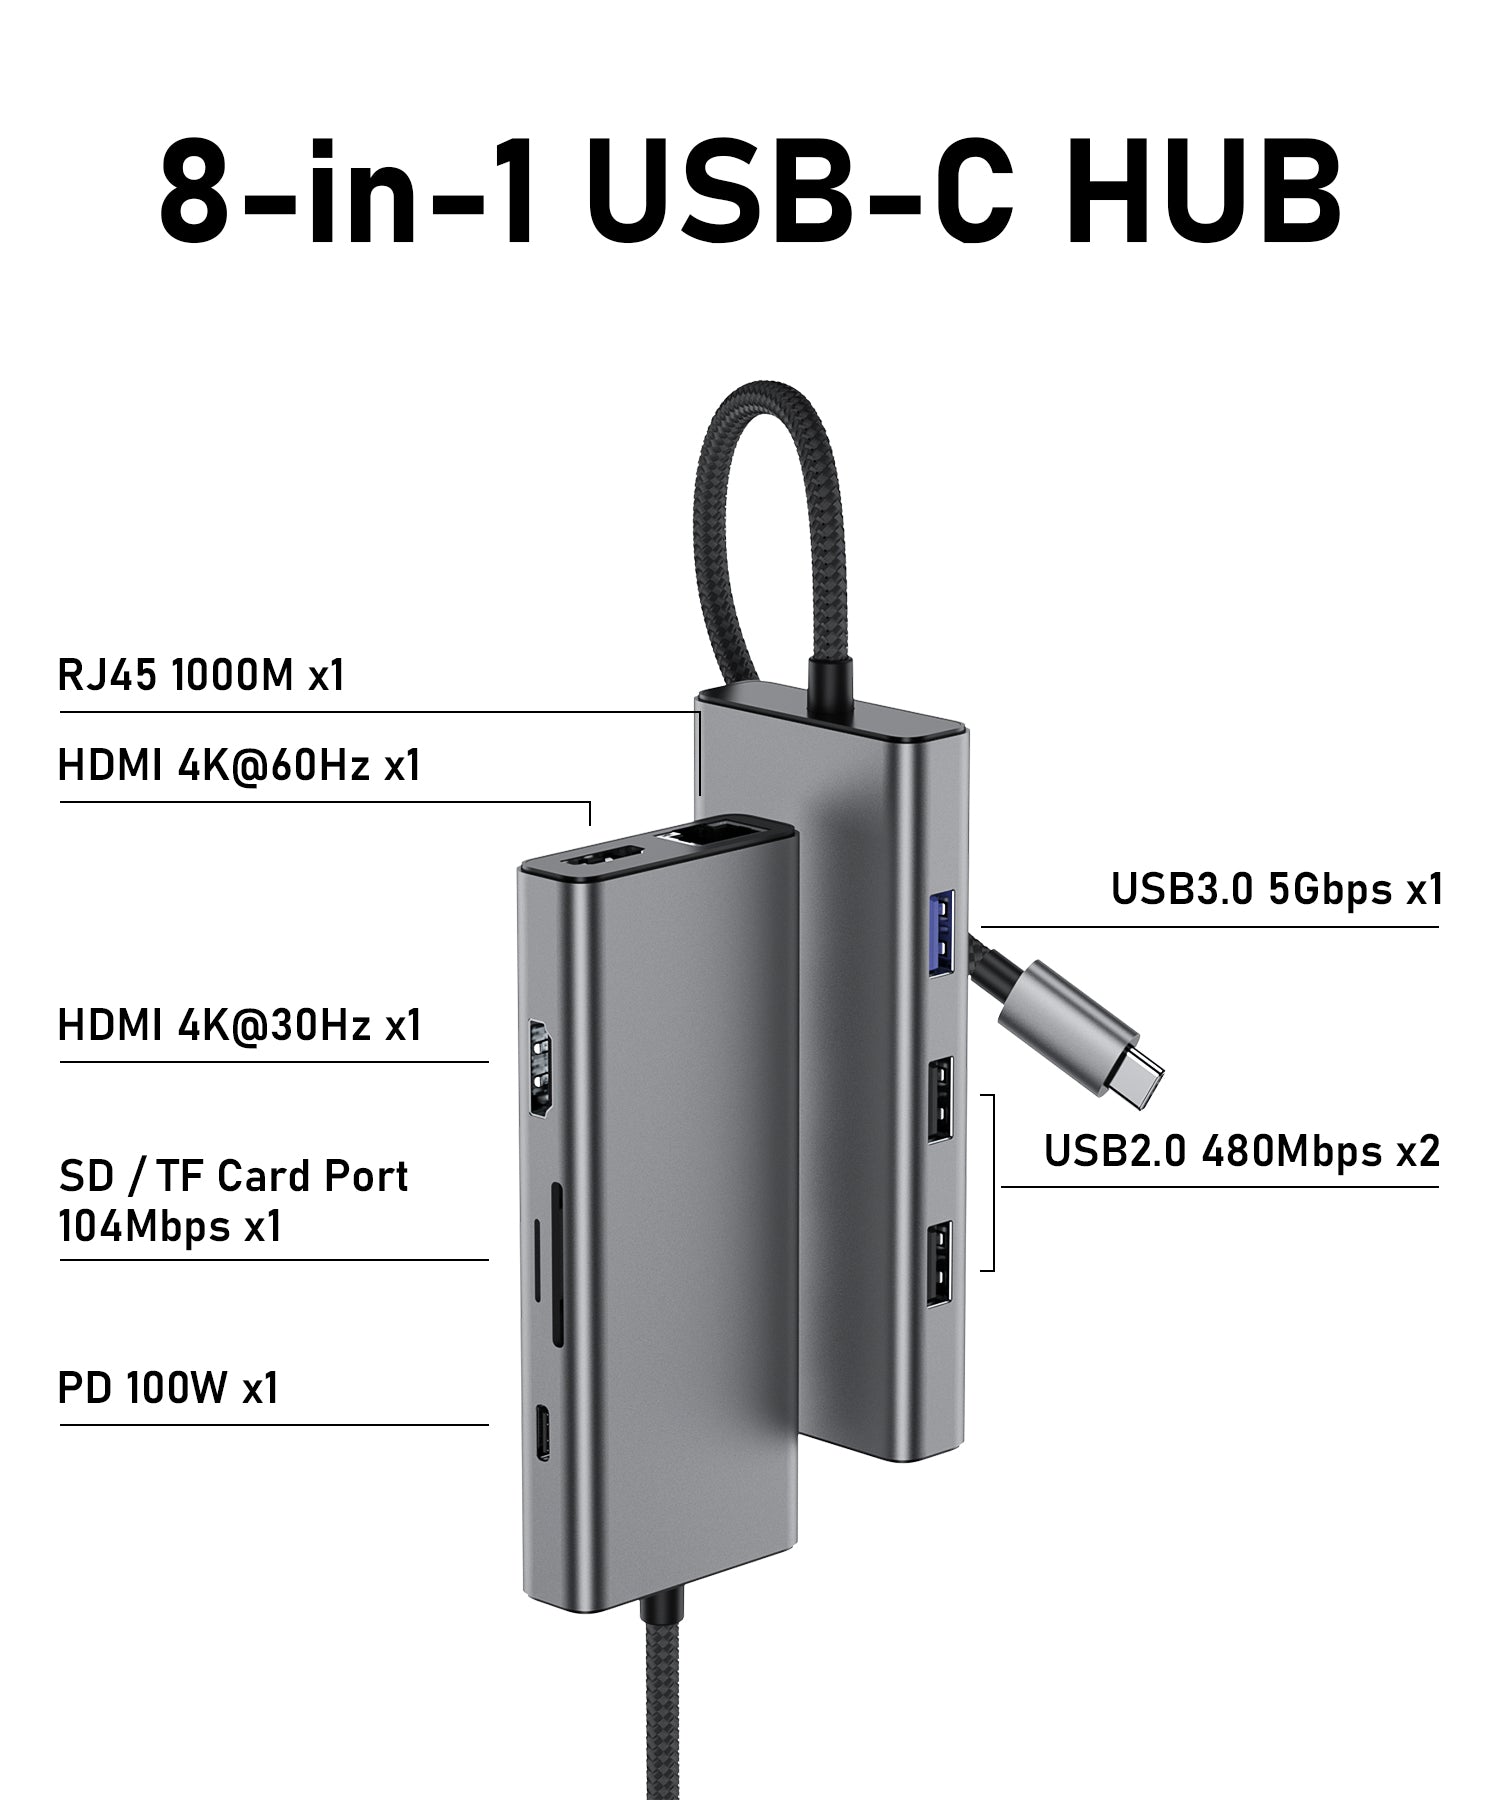 USB C Hub, 8 in 1 USB C to HDMI Multiport Adapter with RJ45 1000M